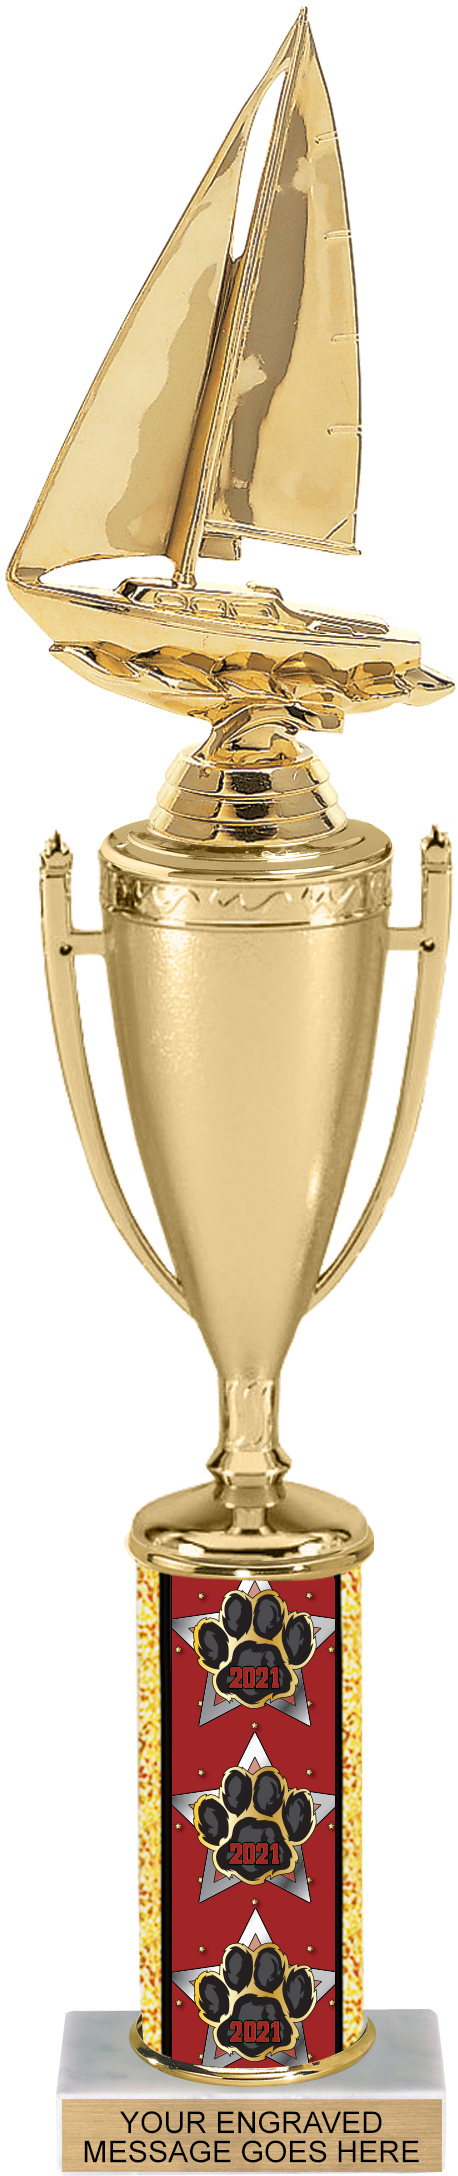 Exclusive Year Paw Column 15 inch Cup Trophy